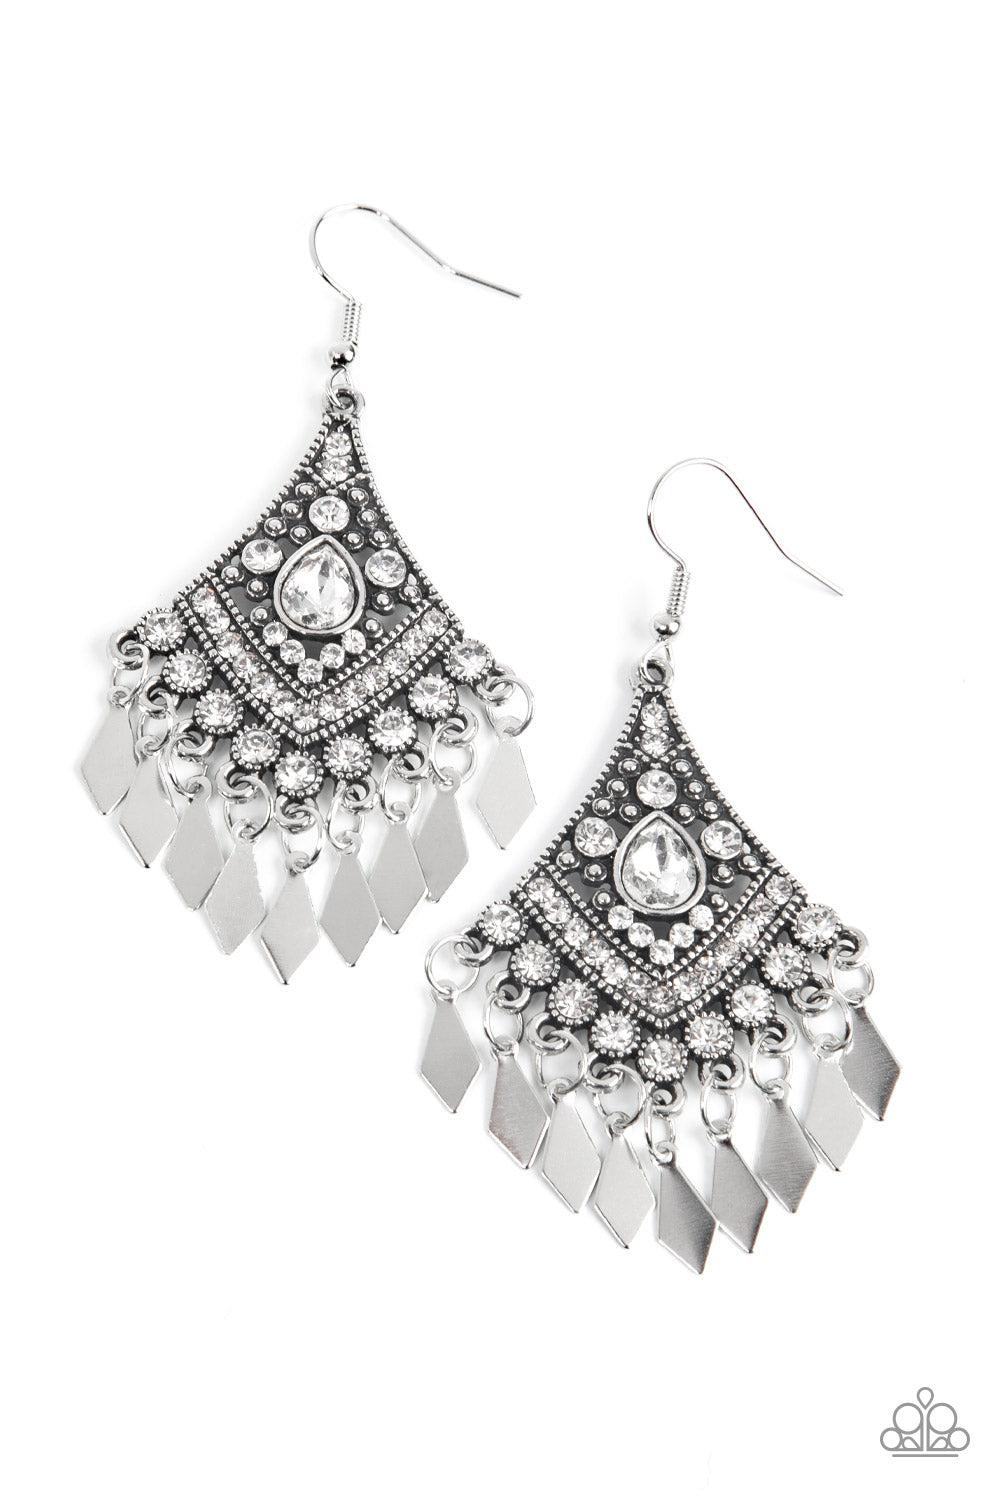 Indie Iridescence White Earrings - Paparazzi Accessories- lightbox - CarasShop.com - $5 Jewelry by Cara Jewels